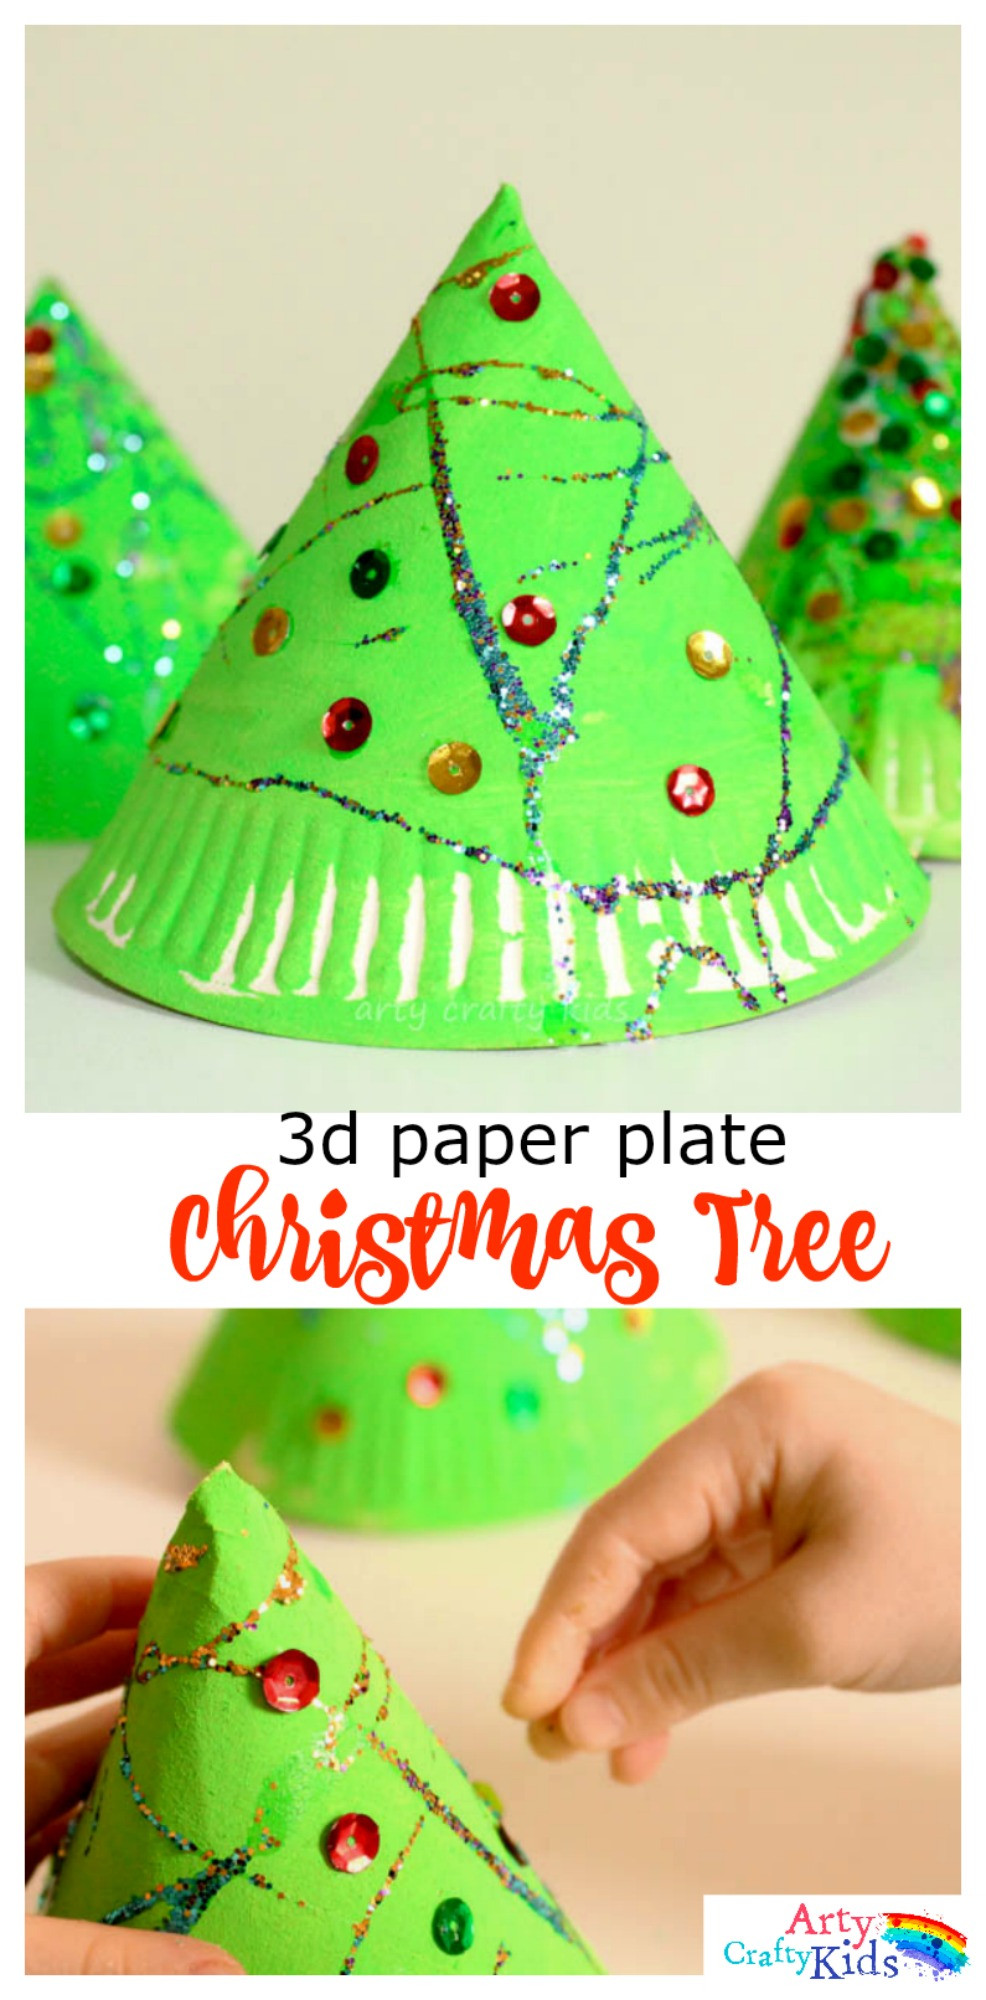 Christmas Paper Crafts For Kids
 Super Fun 3d Paper Plate Christmas Tree Craft